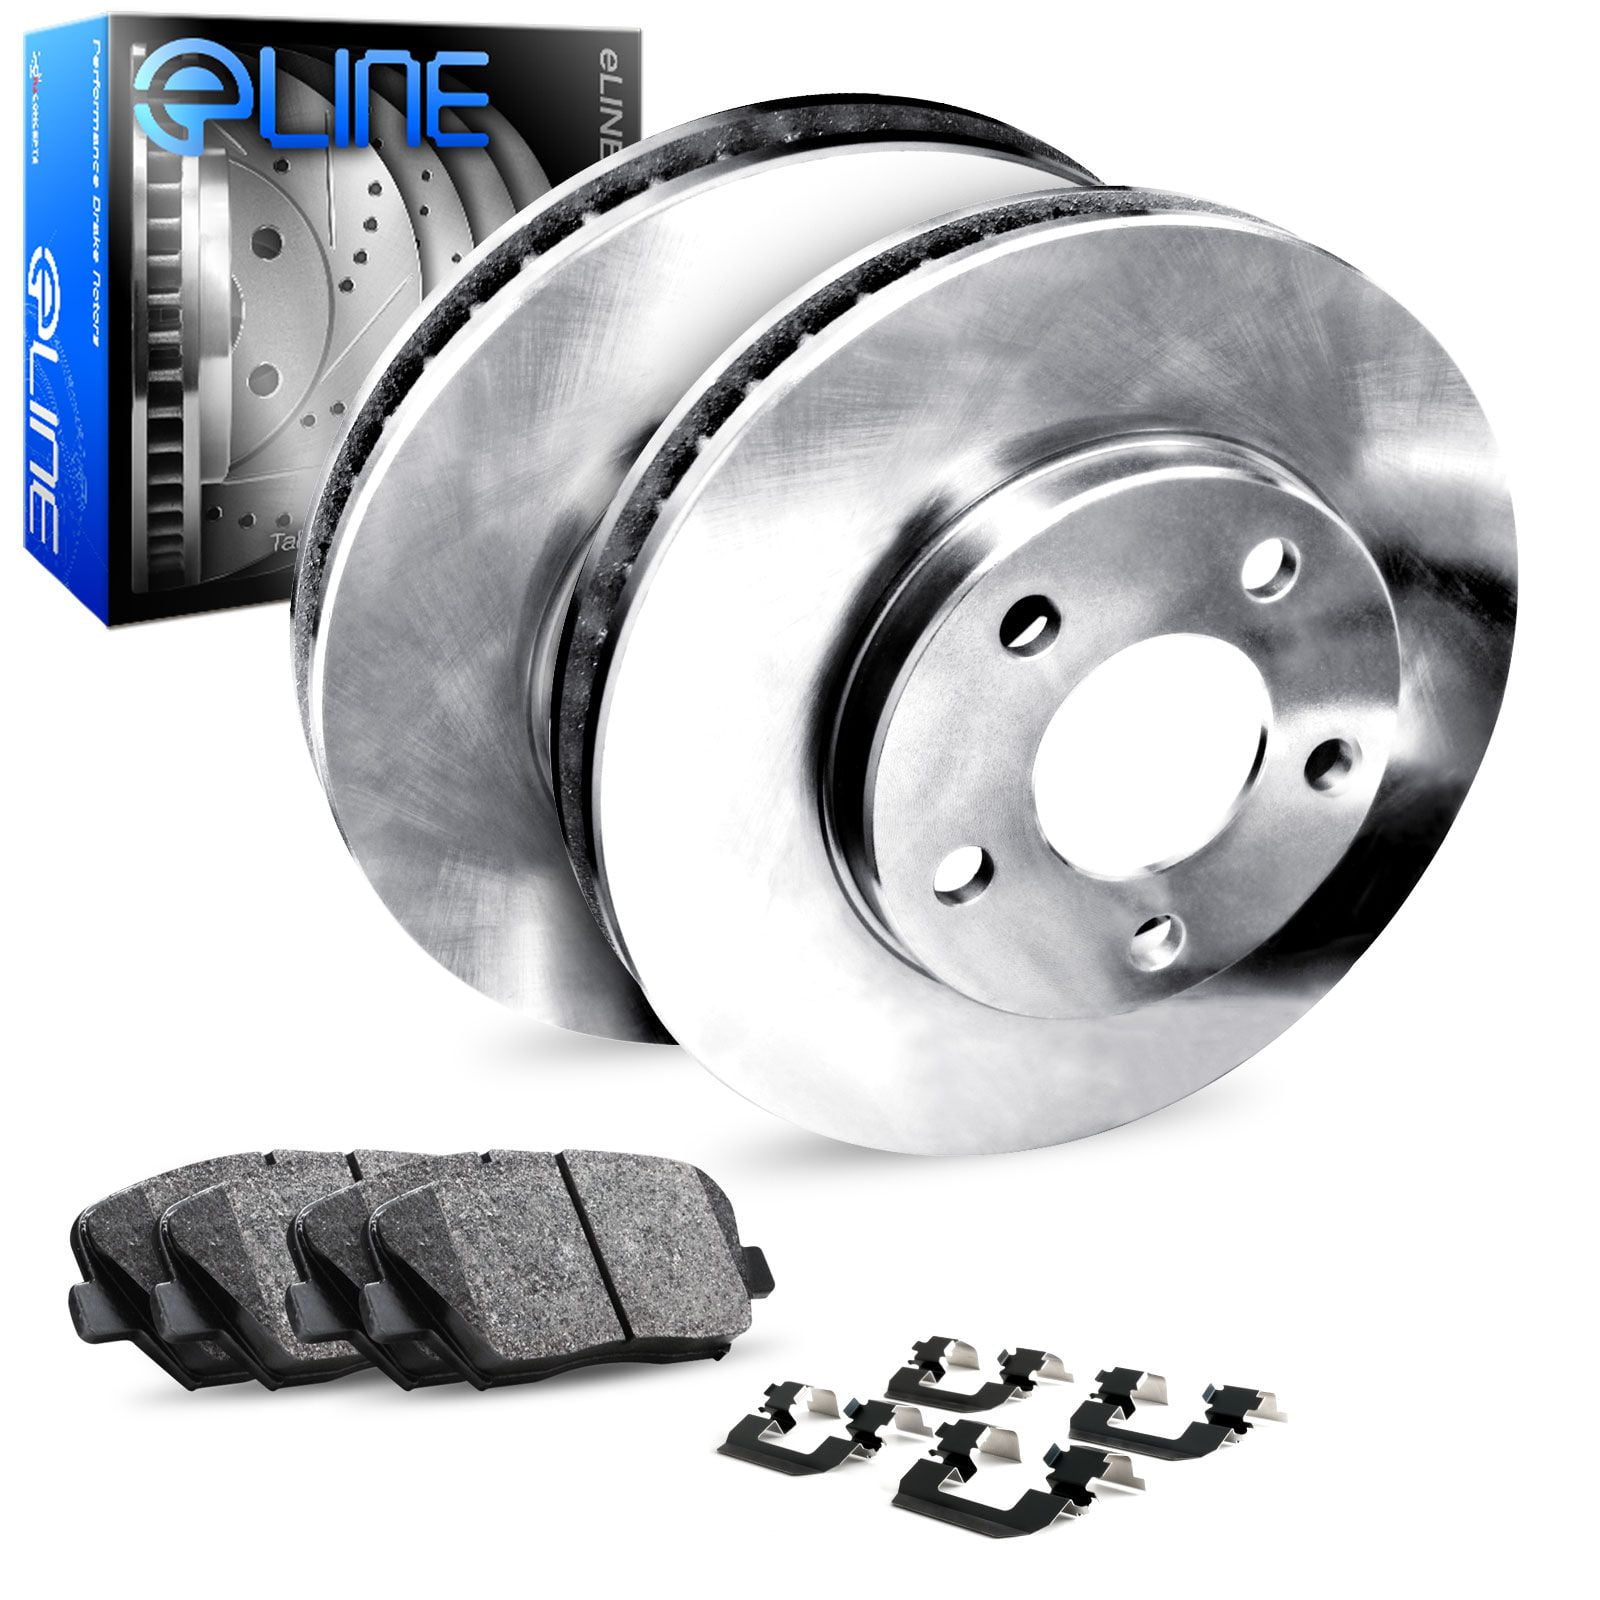 R1 Concepts eLINE Rear Brake Rotors with Super Duty Pads and Hardware Kit R177